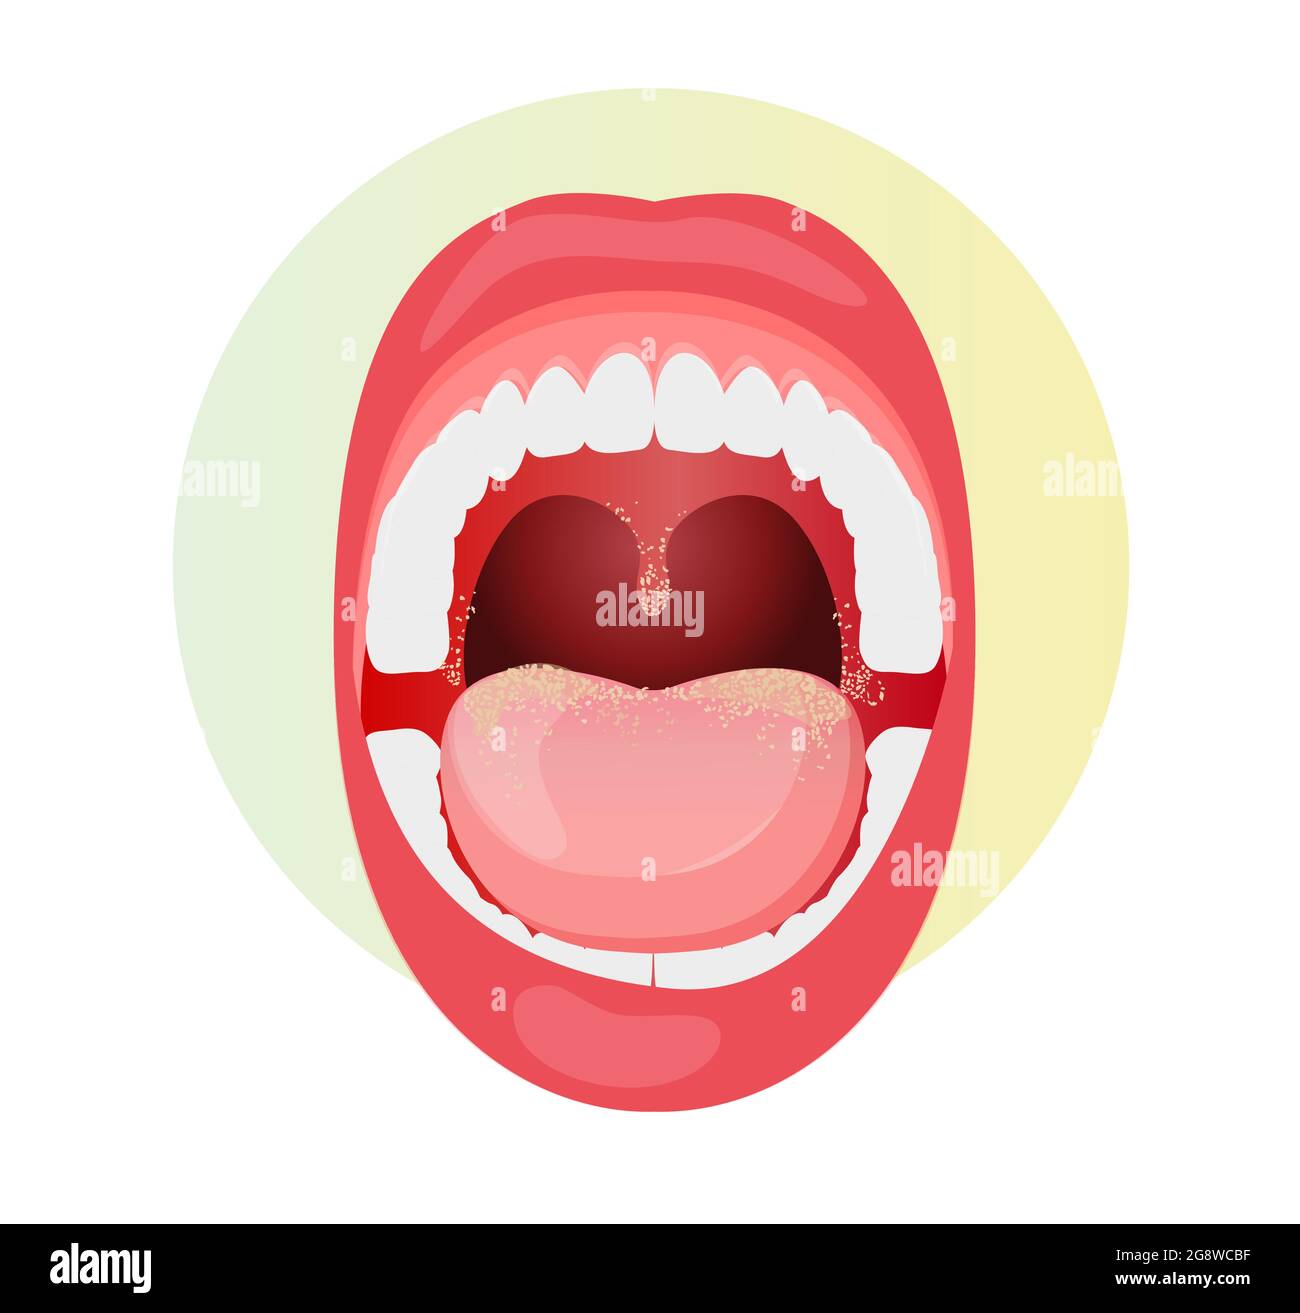 Open Mouth with Fungal Infection on Tongue - stock illustration as EPS 10 File Stock Vector